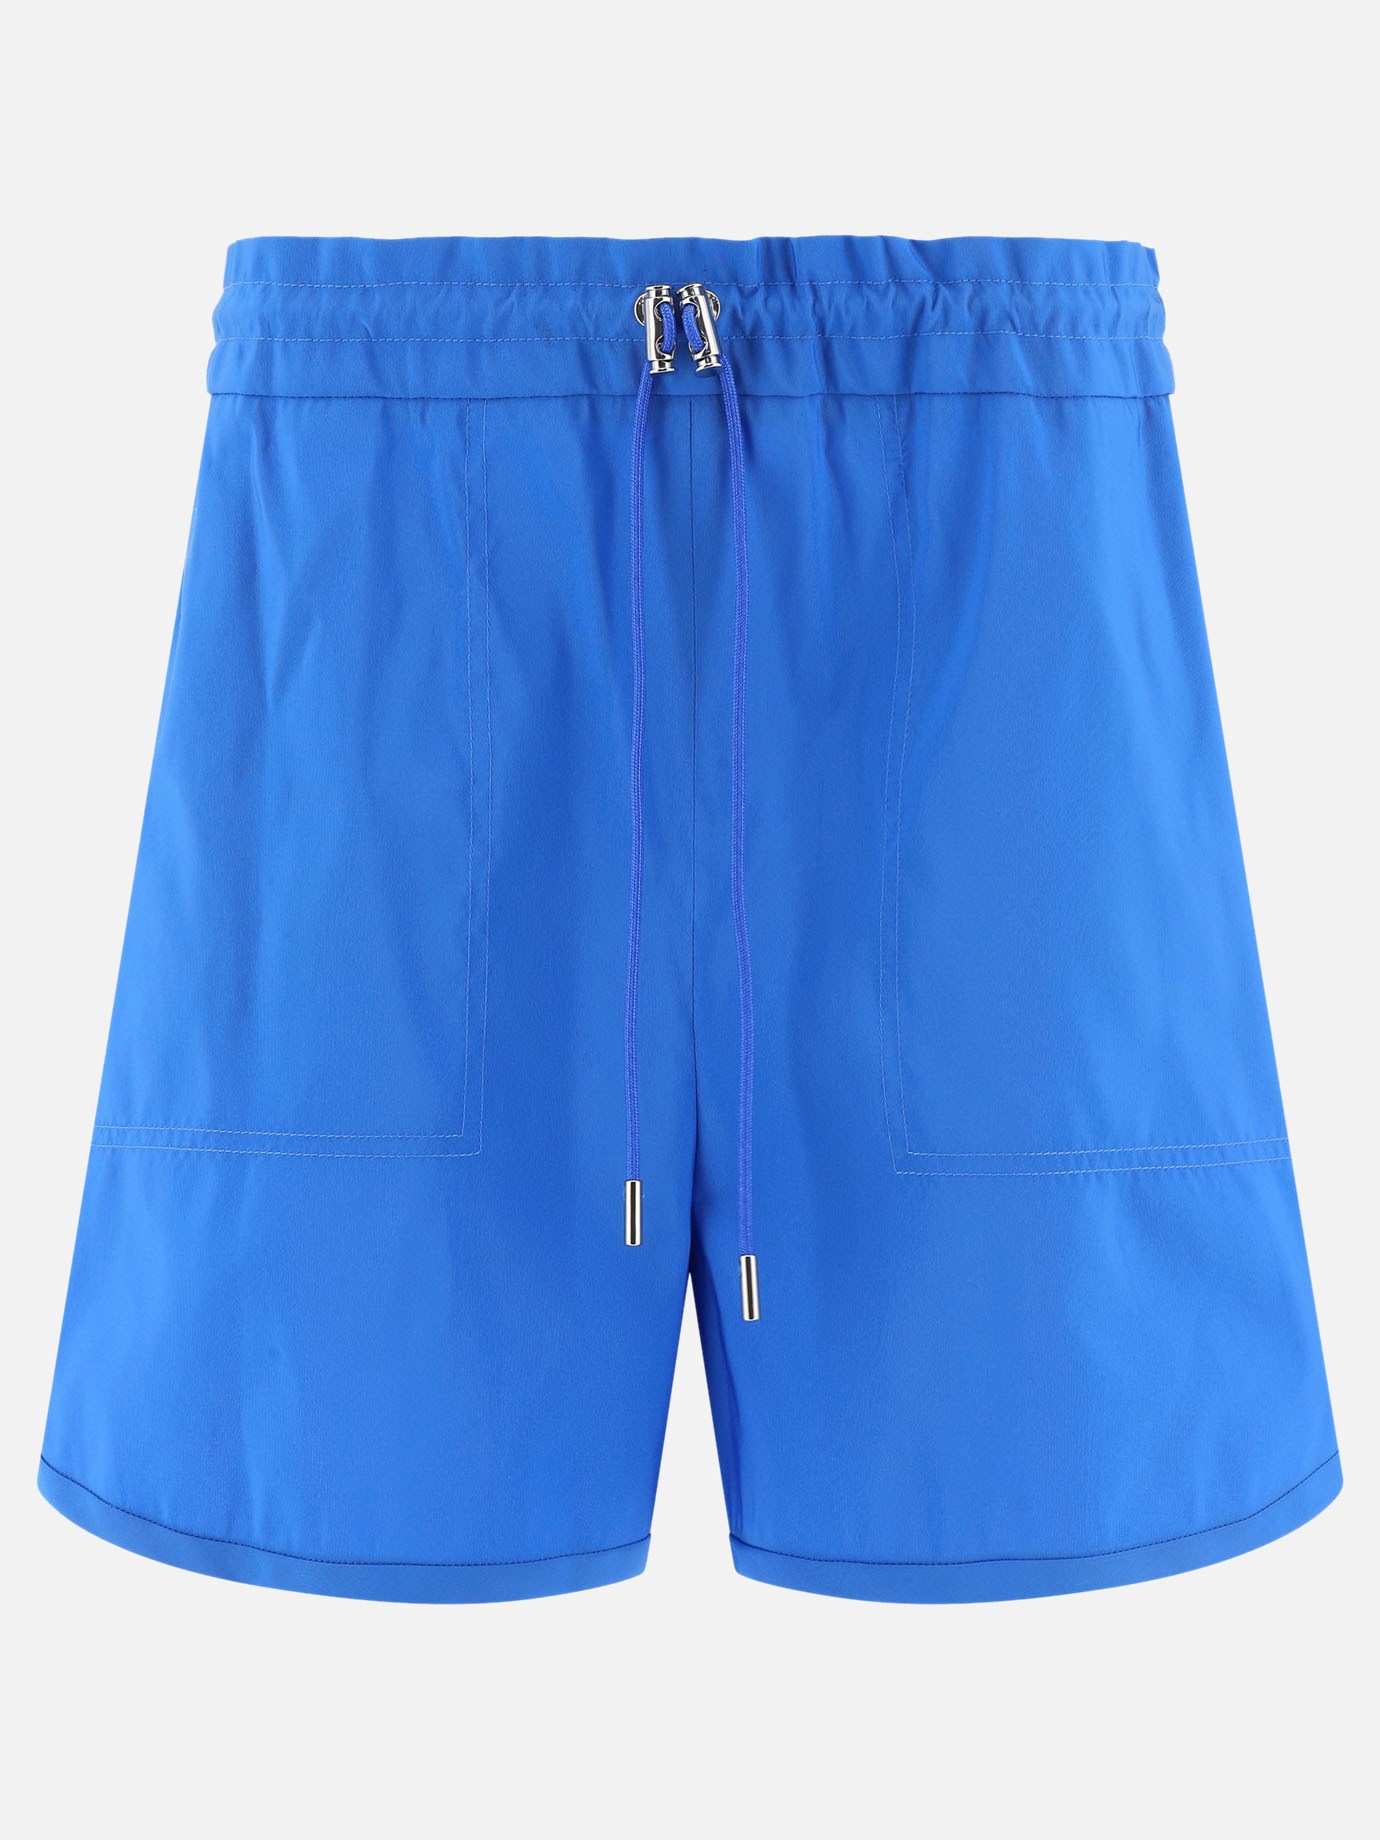 Short with drawstring by Alexander McQueen